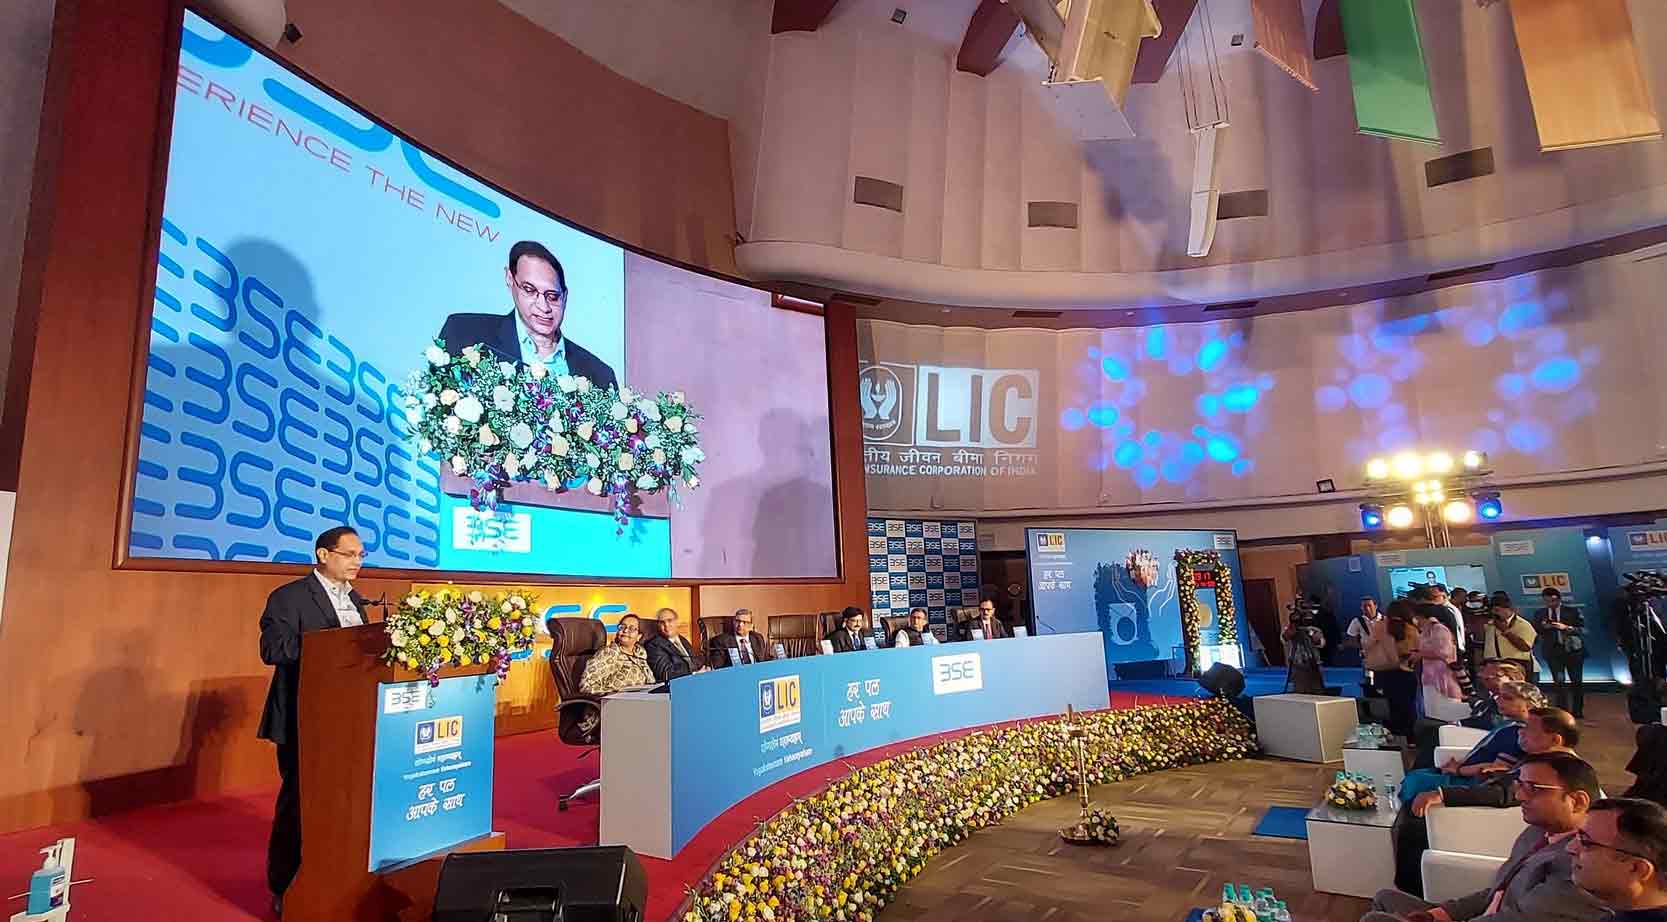 lic ipo listing live updates: shares to make debut on nse, bse today; all you need to know about timing, expectations and more